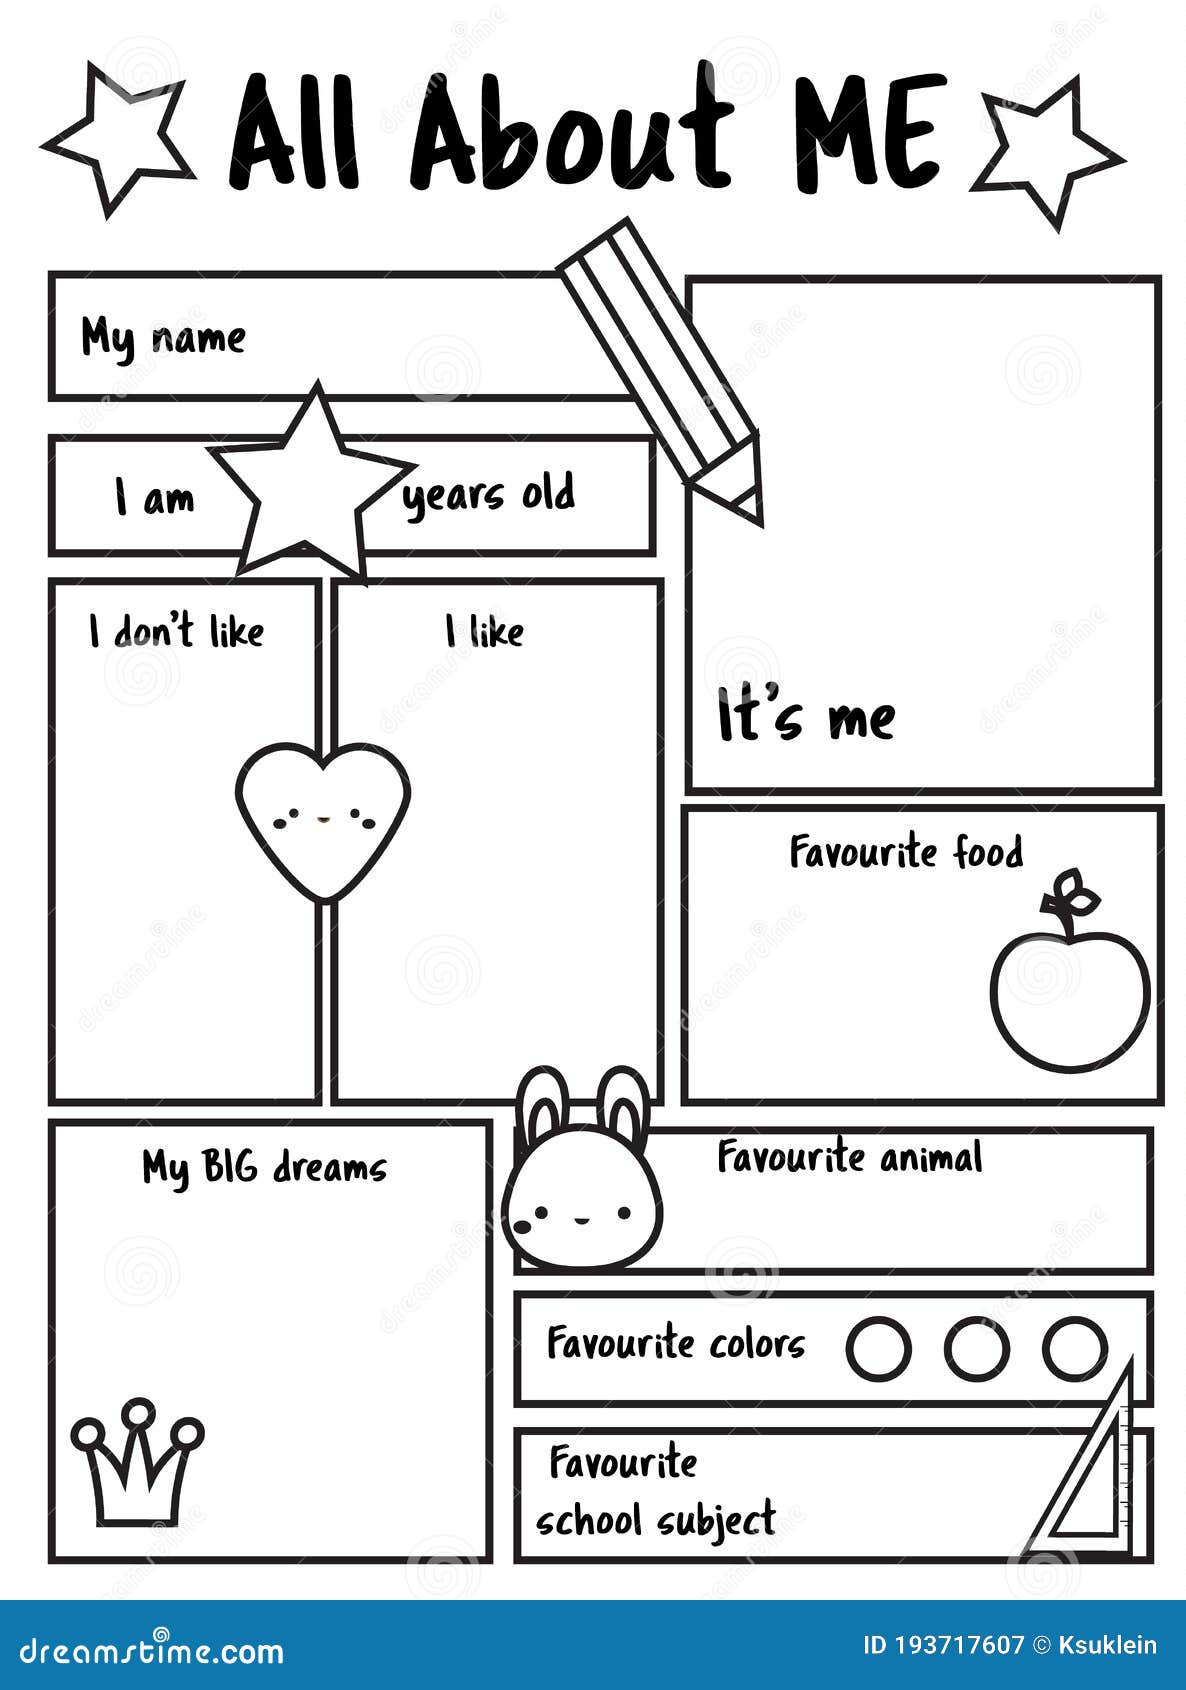 all about me printable sheet. writing prompt for kids blank. educational children page.